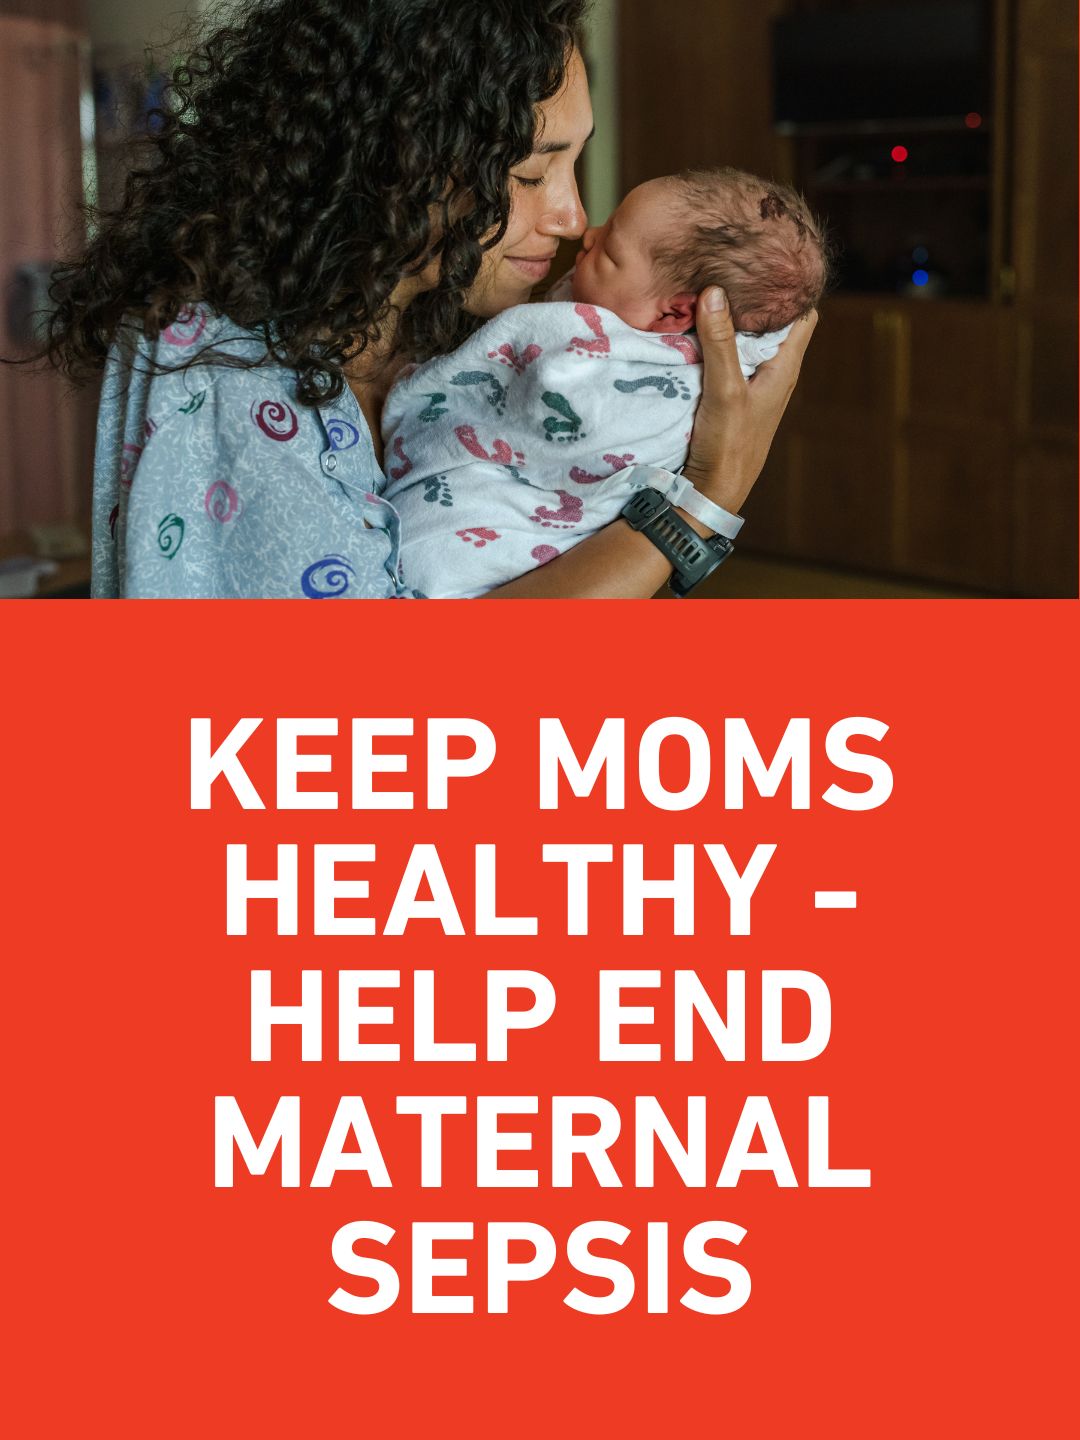 Join the fight - keep moms healthy